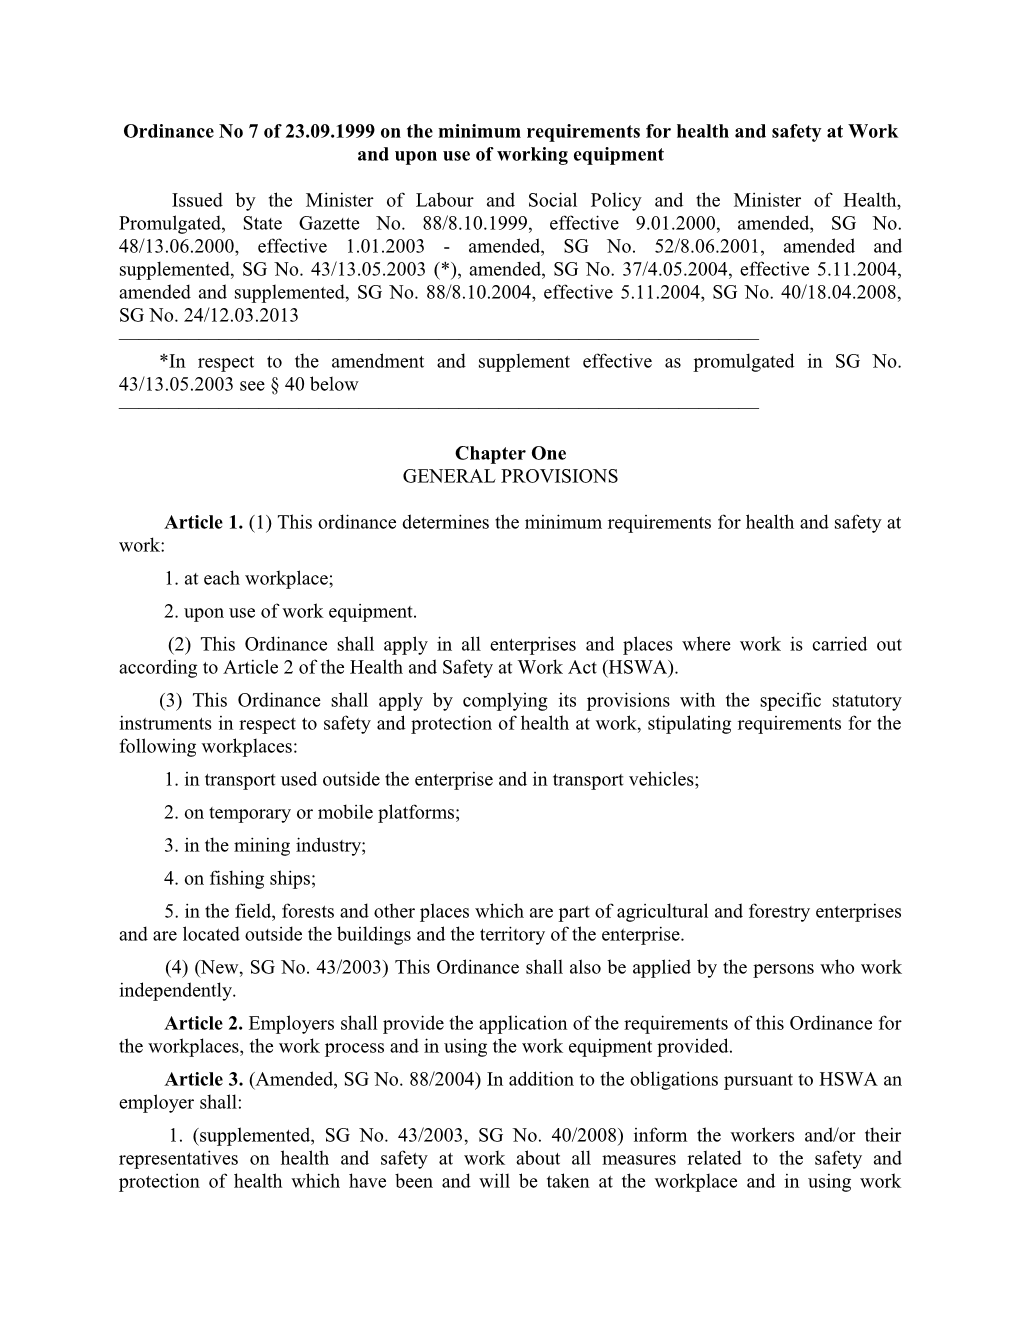 Ordinance No 7 of 23.09.1999 on the Minimum Requirements for Health and Safety at Work